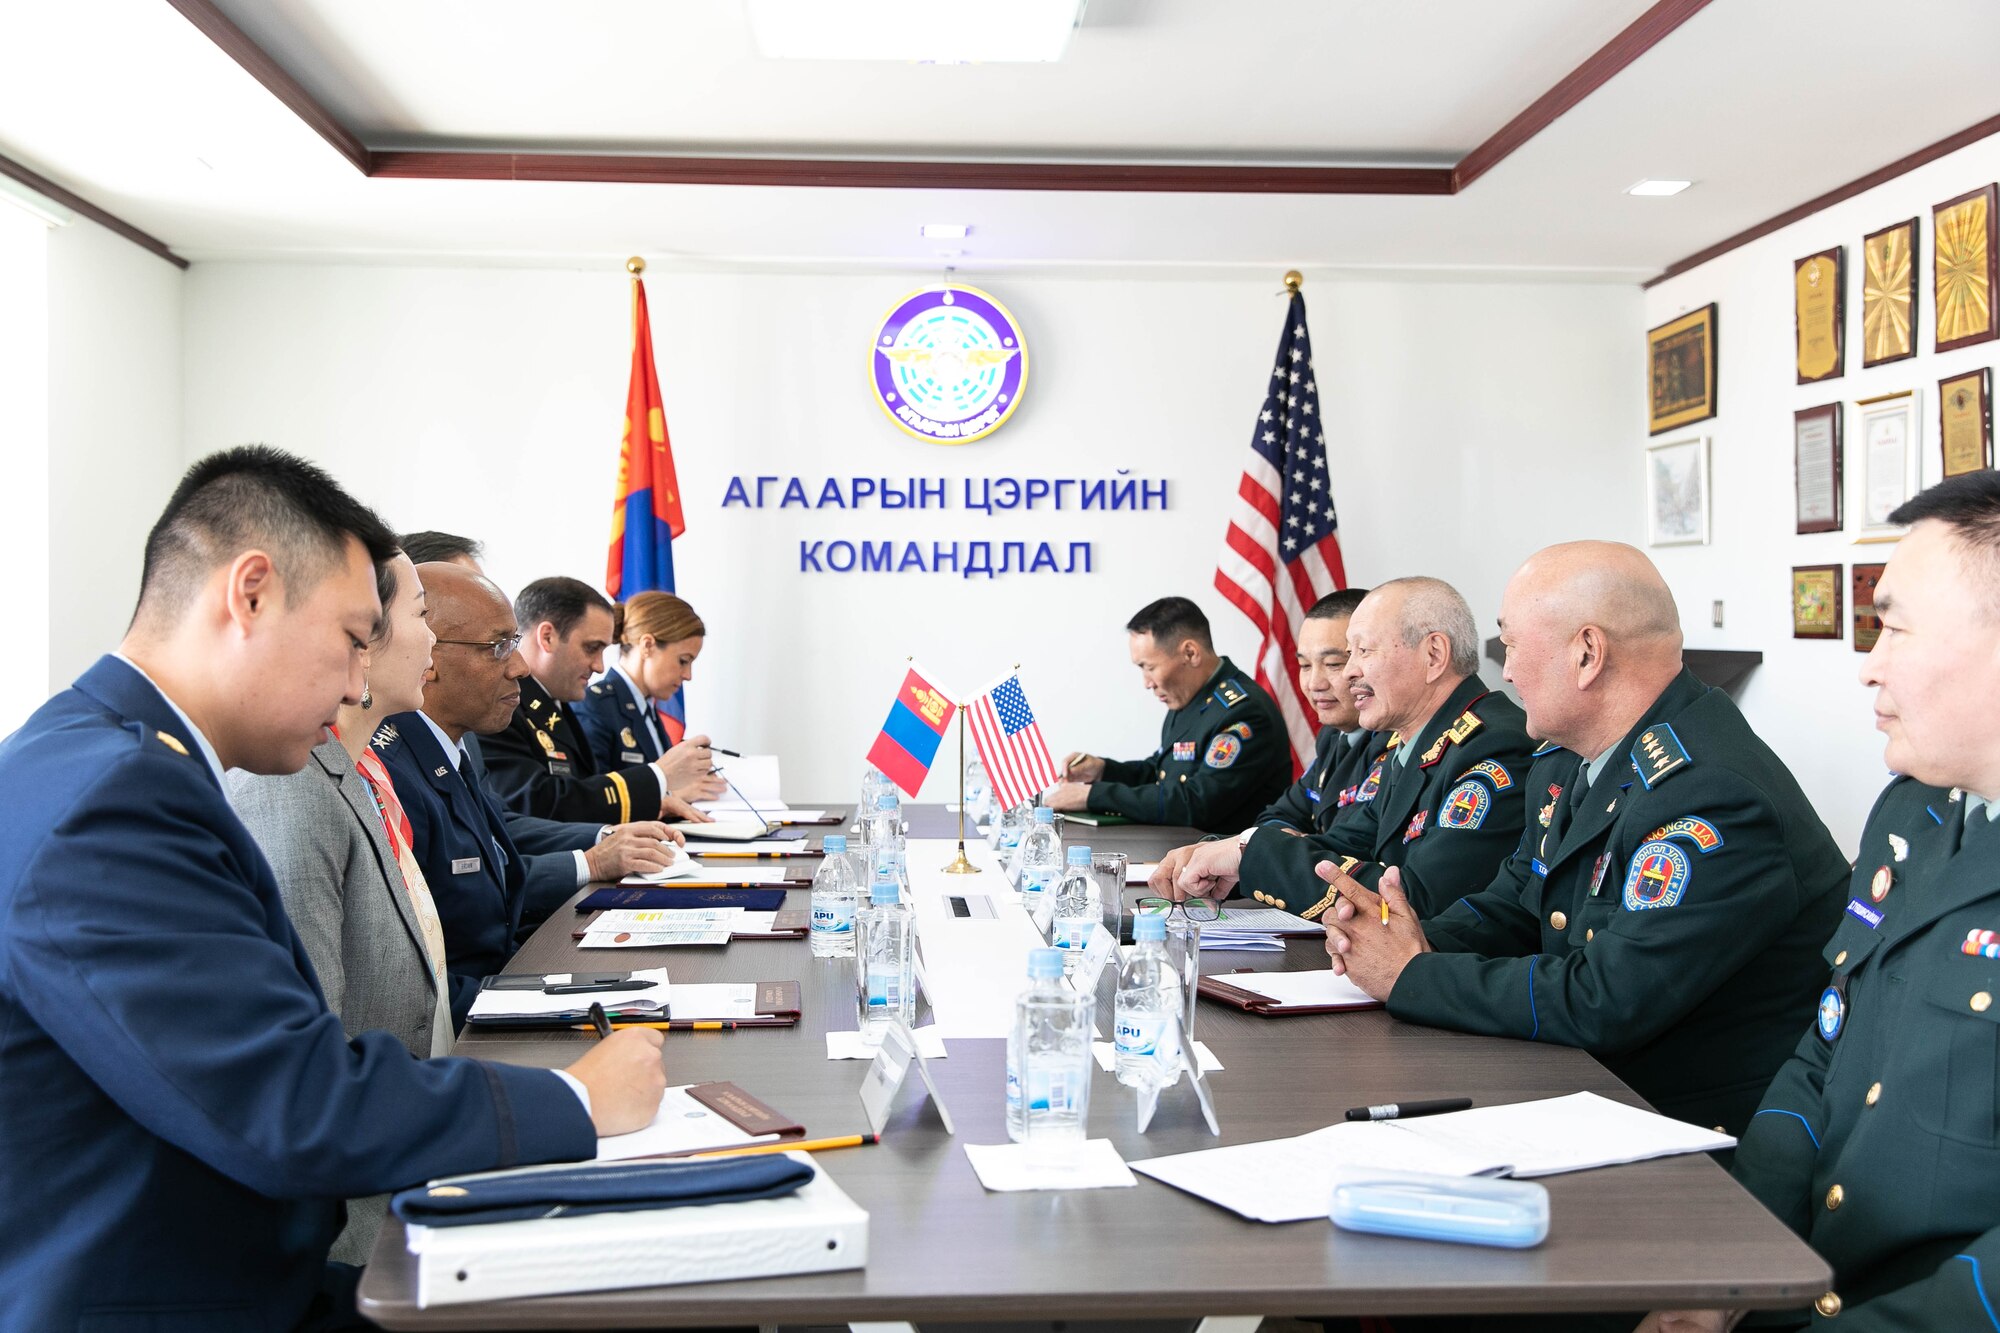 Brig. Gen. Enkhbayar Ochir, commander of Mongolian Air Force Command (MAFC), welcomes Gen. CQ Brown Jr., Pacific Air Forces commander, and his staff at the MAFC headquarters in Ulaanbaatar, Mongolia, May 14. In addition to evaluating the recent success of the Airman-to-Airman Talks in Hawaii in March, discussions during the visit included opportunities to enhance training, exercises and subject matter expert exchanges. (photo courtesy US Embassy)